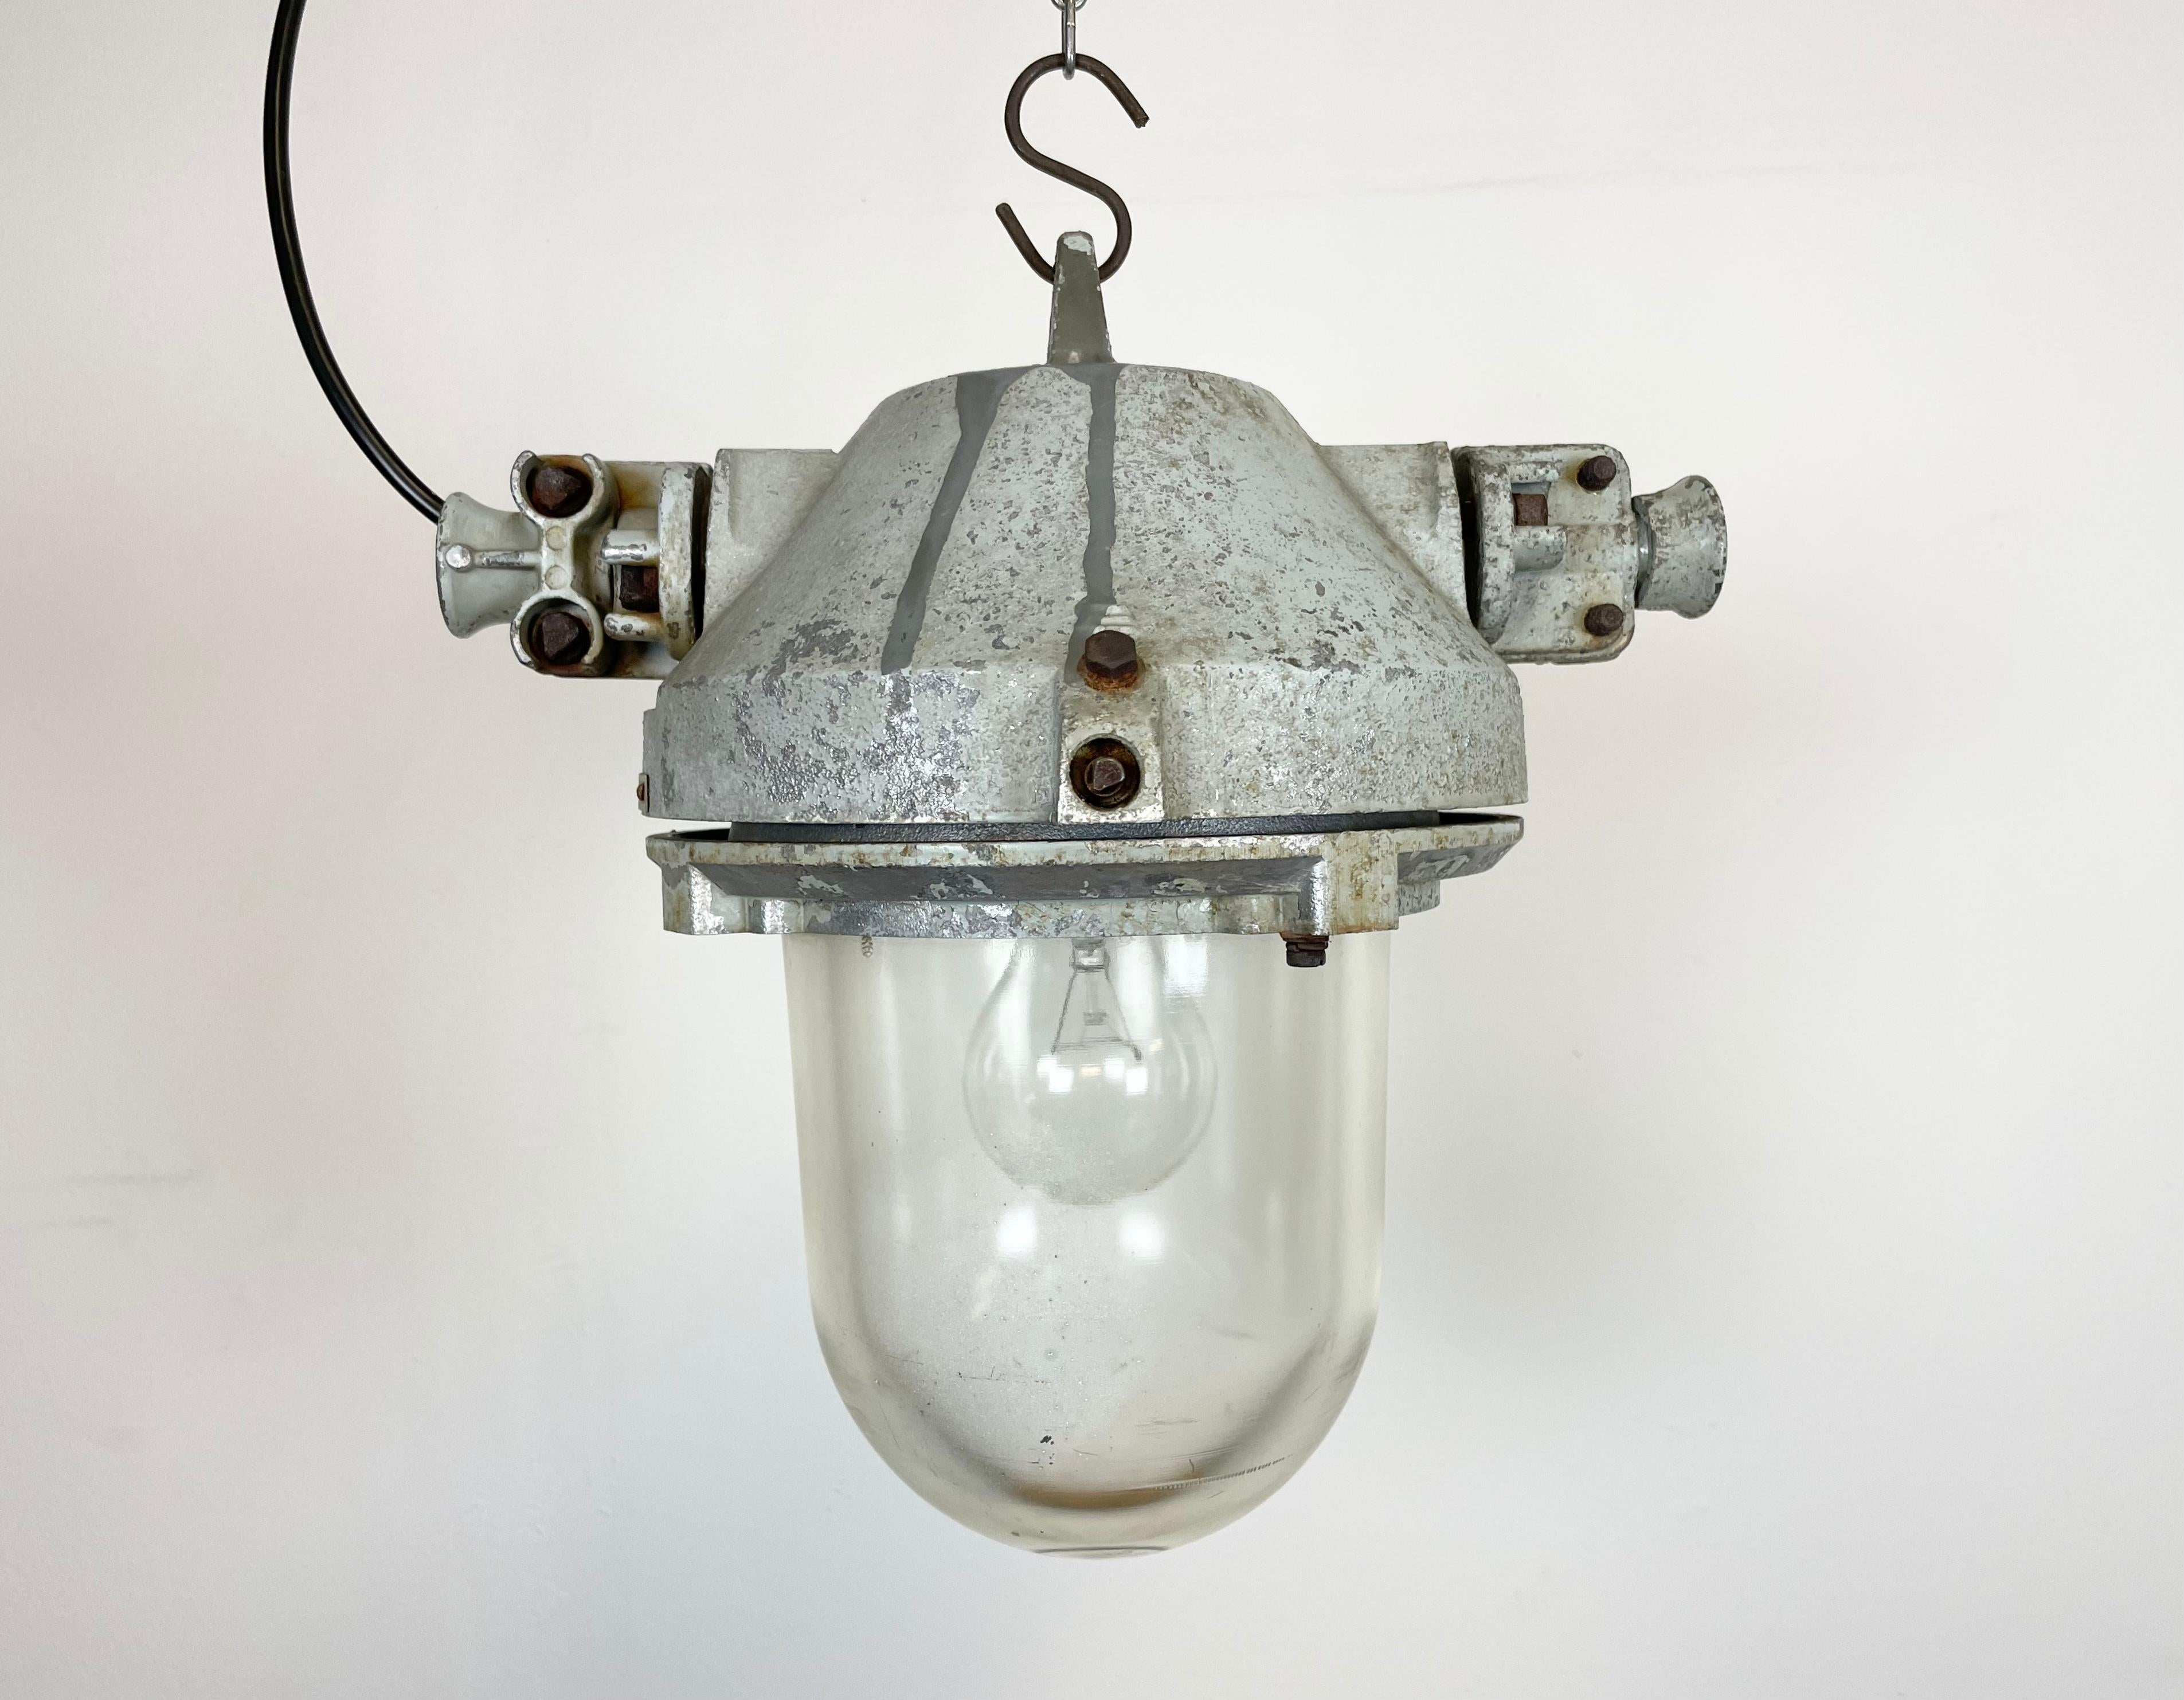 Grey industrial light with massive protective glass bulb. Made in former Czechoslovakia by Elektrosvit during the 1970s. It features cast aluminium body and clear glass. Porcelain socket requires E27 lightbulbs. Newly wired. Weight: 9 kg.